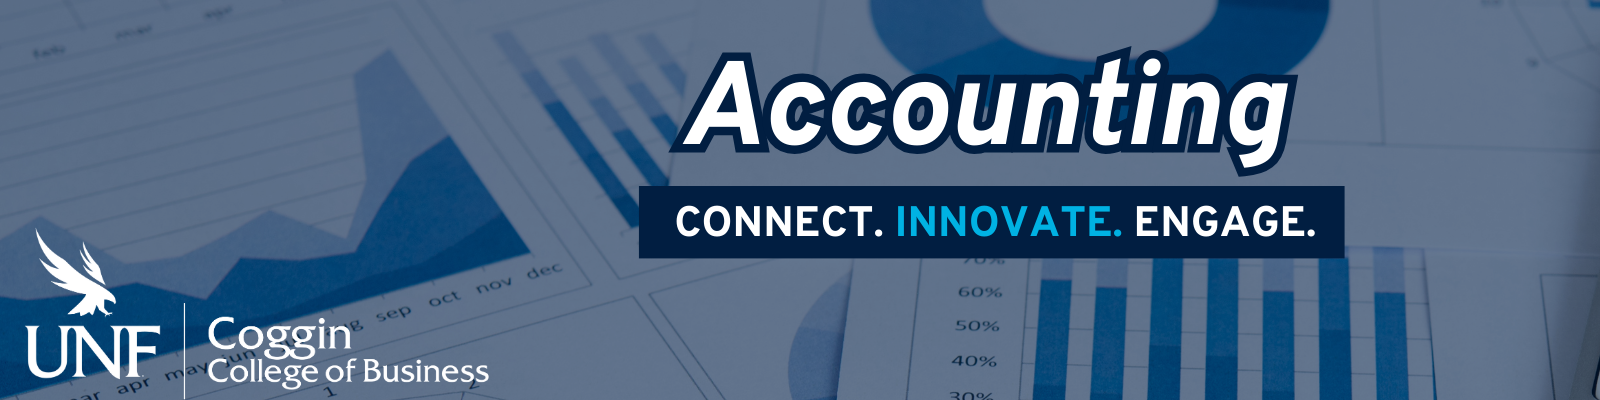 UNF Coggin College of Business logo, Accounting Connect Innovate Engage